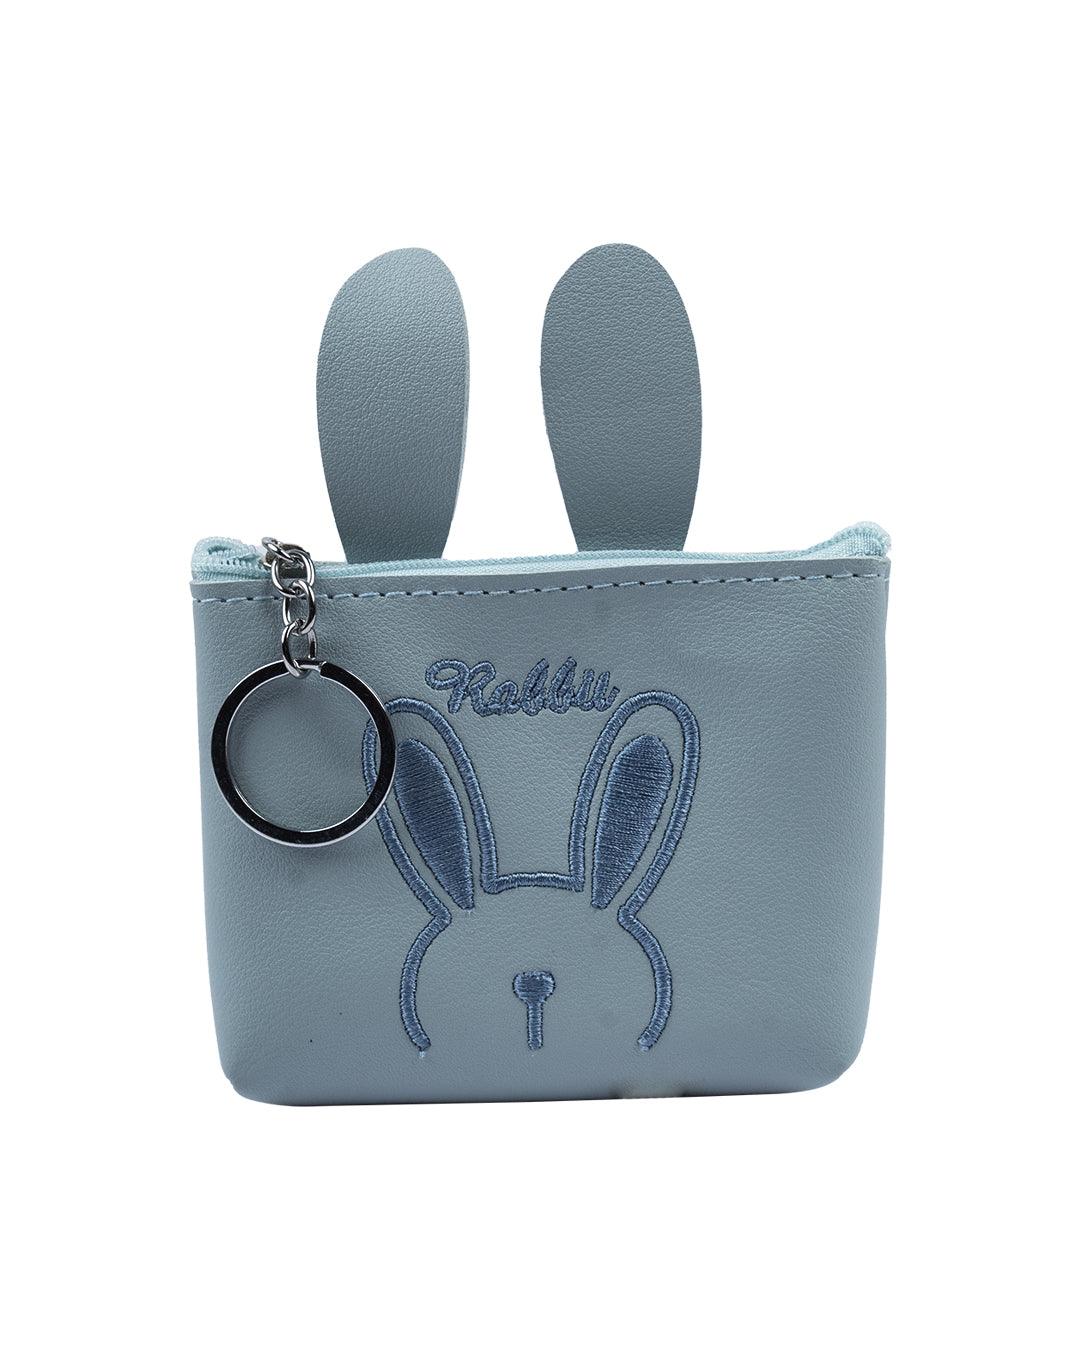 Donati Coin Pouch, Bunny Print, Light Blue, PU Leather - MARKET 99